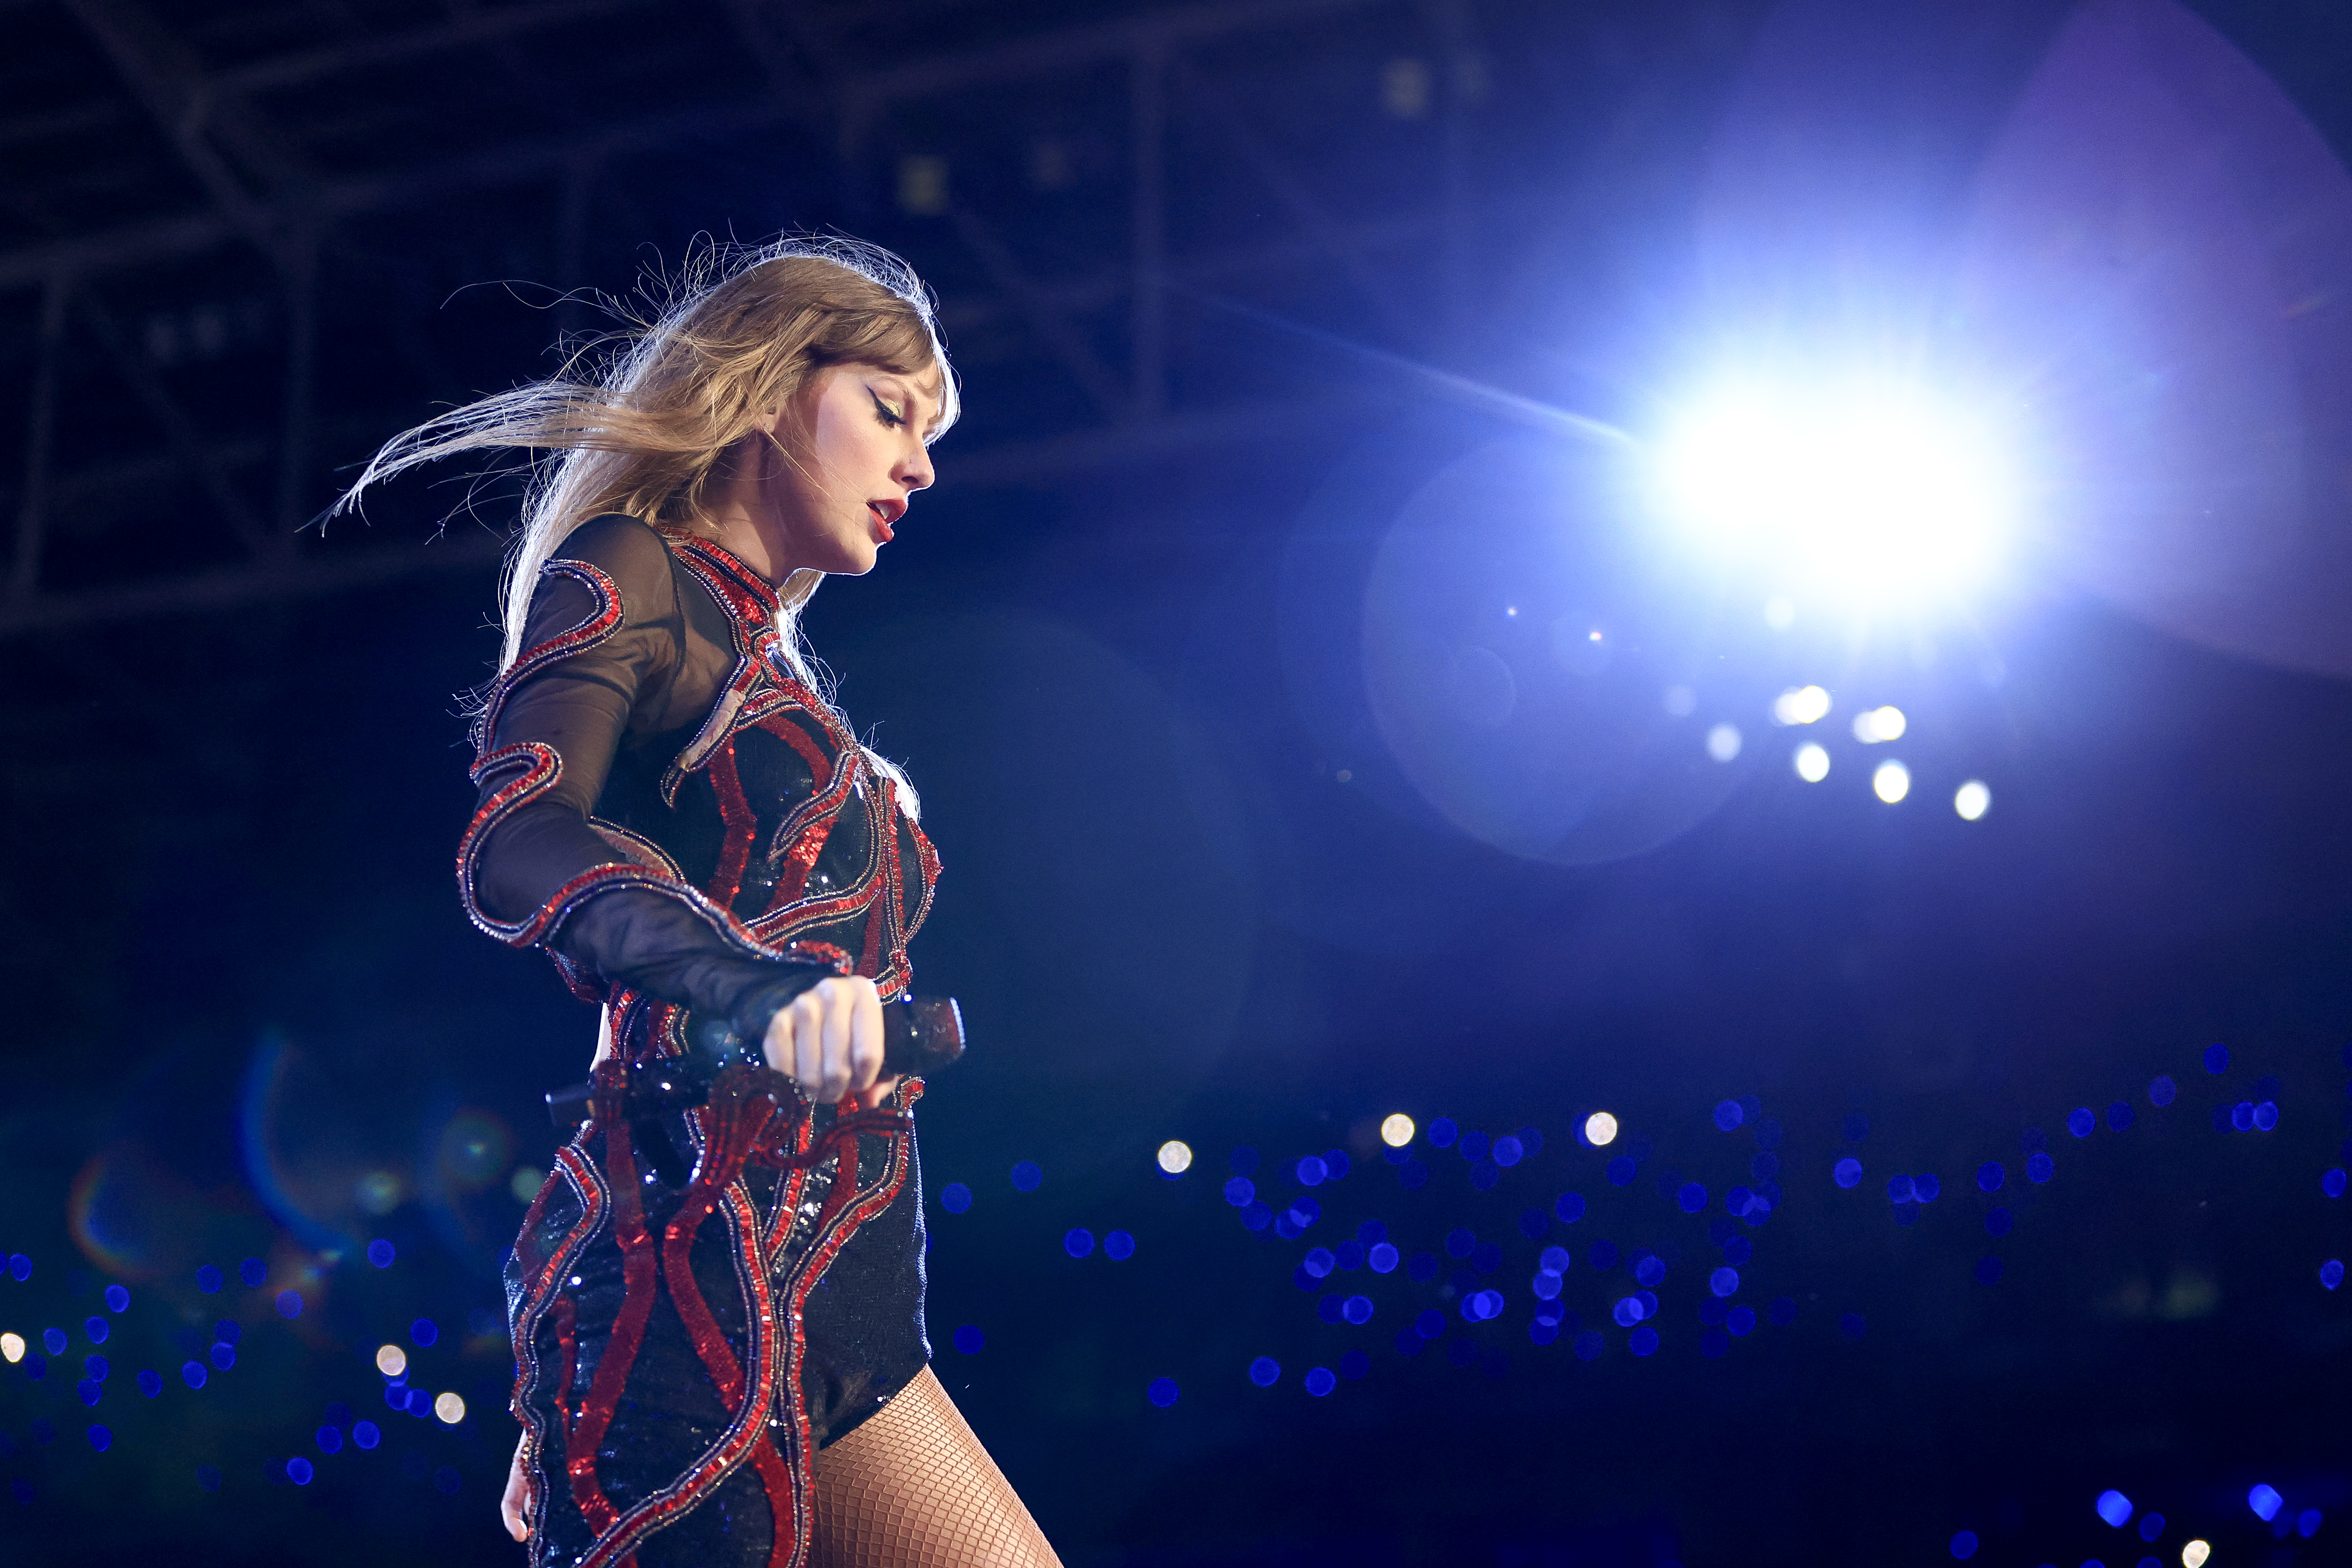 Taylor Swift lit up onstage.